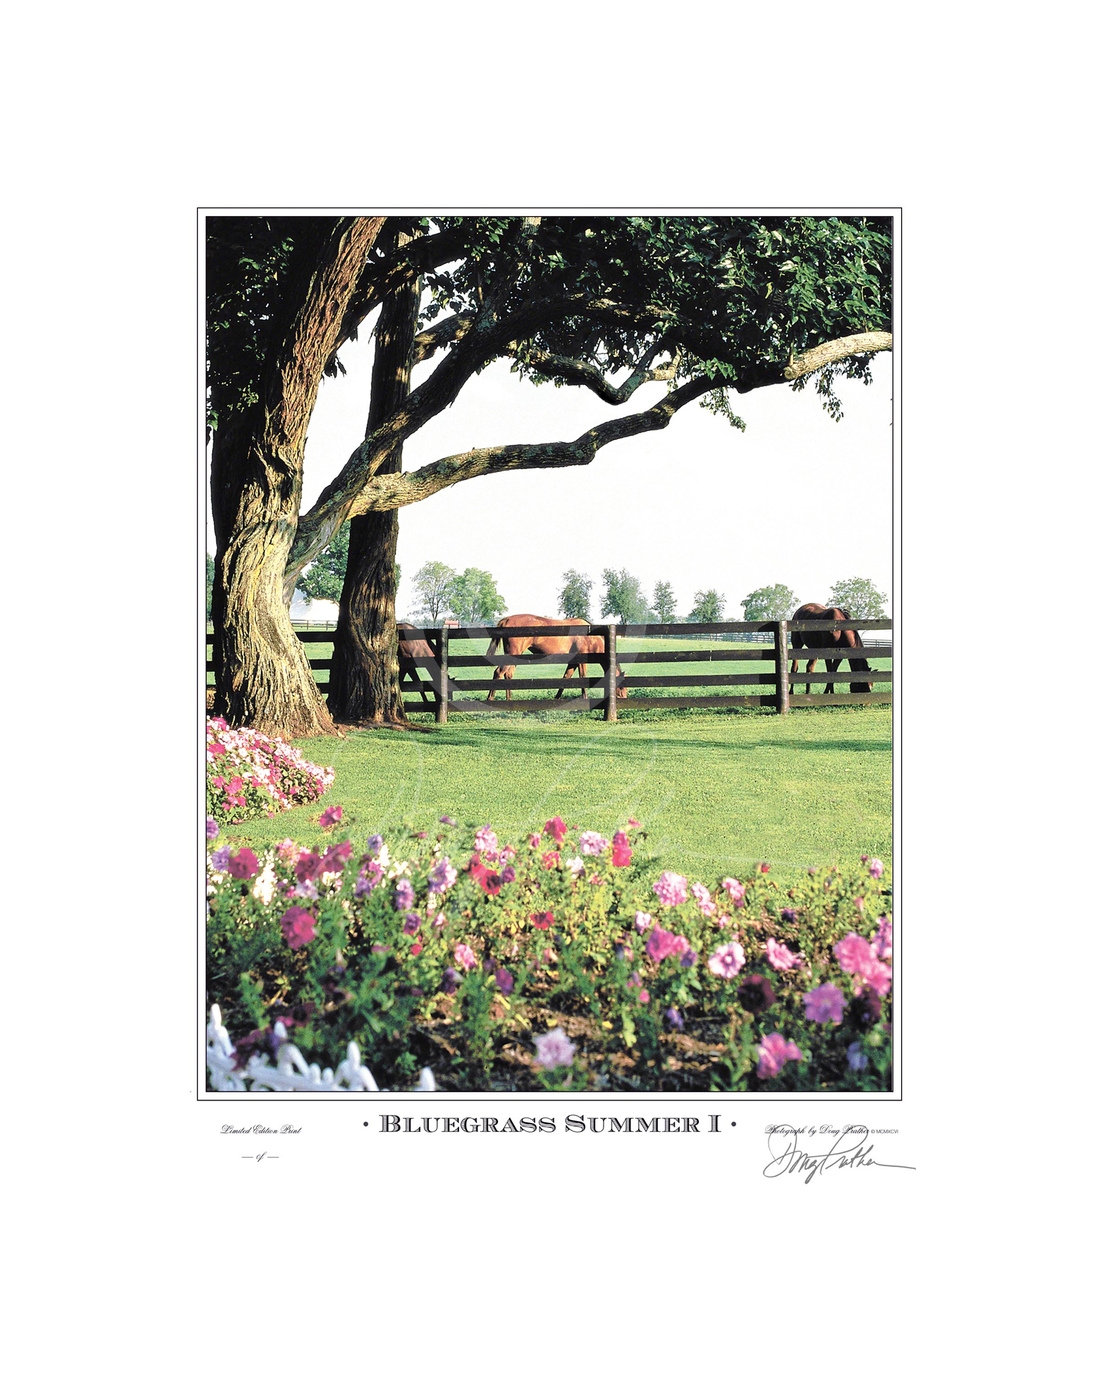 Bluegrass Summer I, a fine art horse print. A lush scene intertwining summer flowers, horses, trees and fences into a beautiful pastoral scene on Green Gates Farm, Ironworks Pike, Lexington, Ky. This was also the former Spendthrift and Elmendorf Farms. Ph